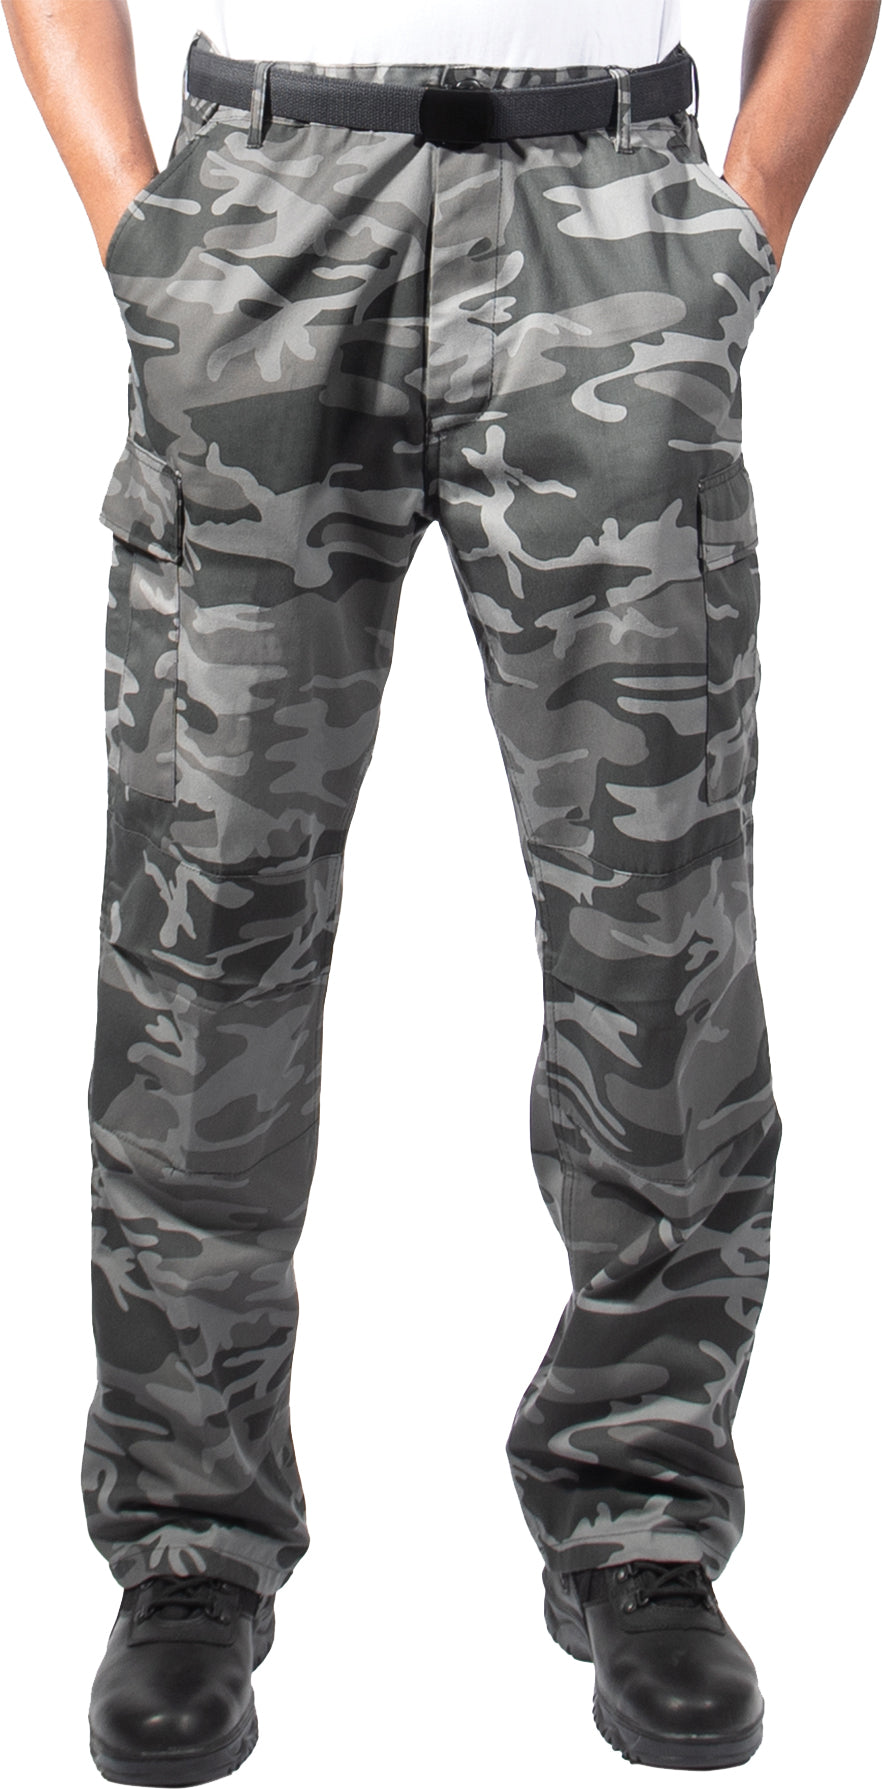 Black Camo - Relaxed Fit Zipper Fly BDU Pants